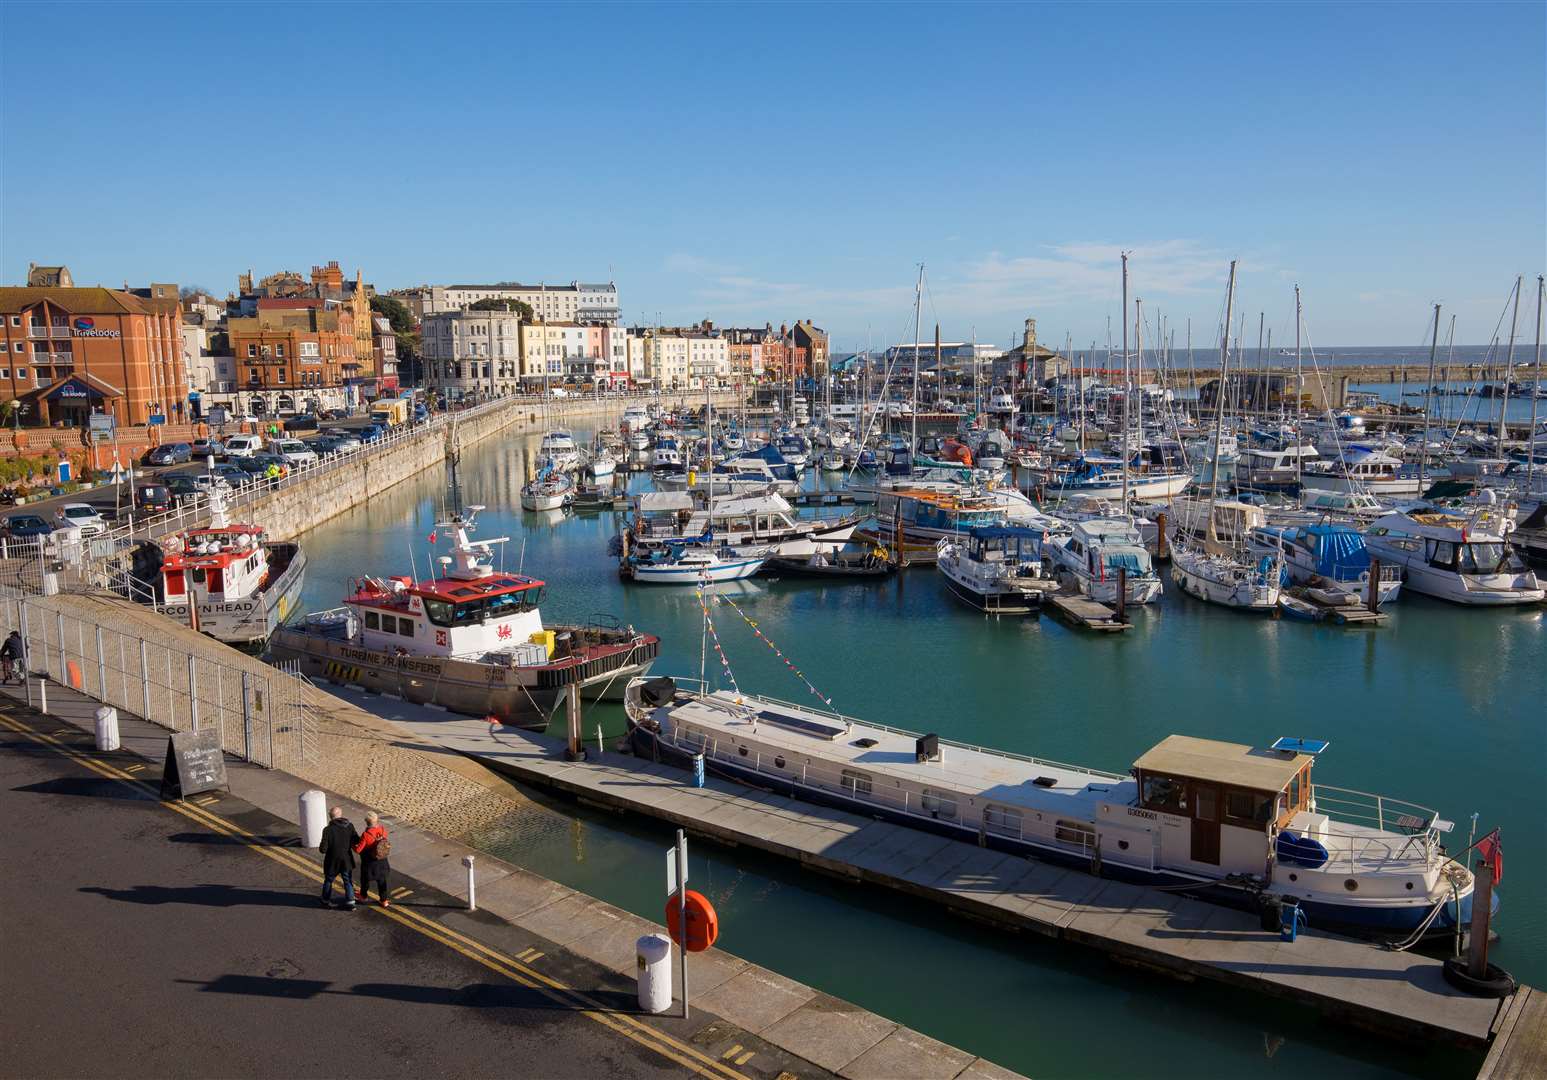 The unmanned Home Office vessel was spotted in Ramsgate Harbour